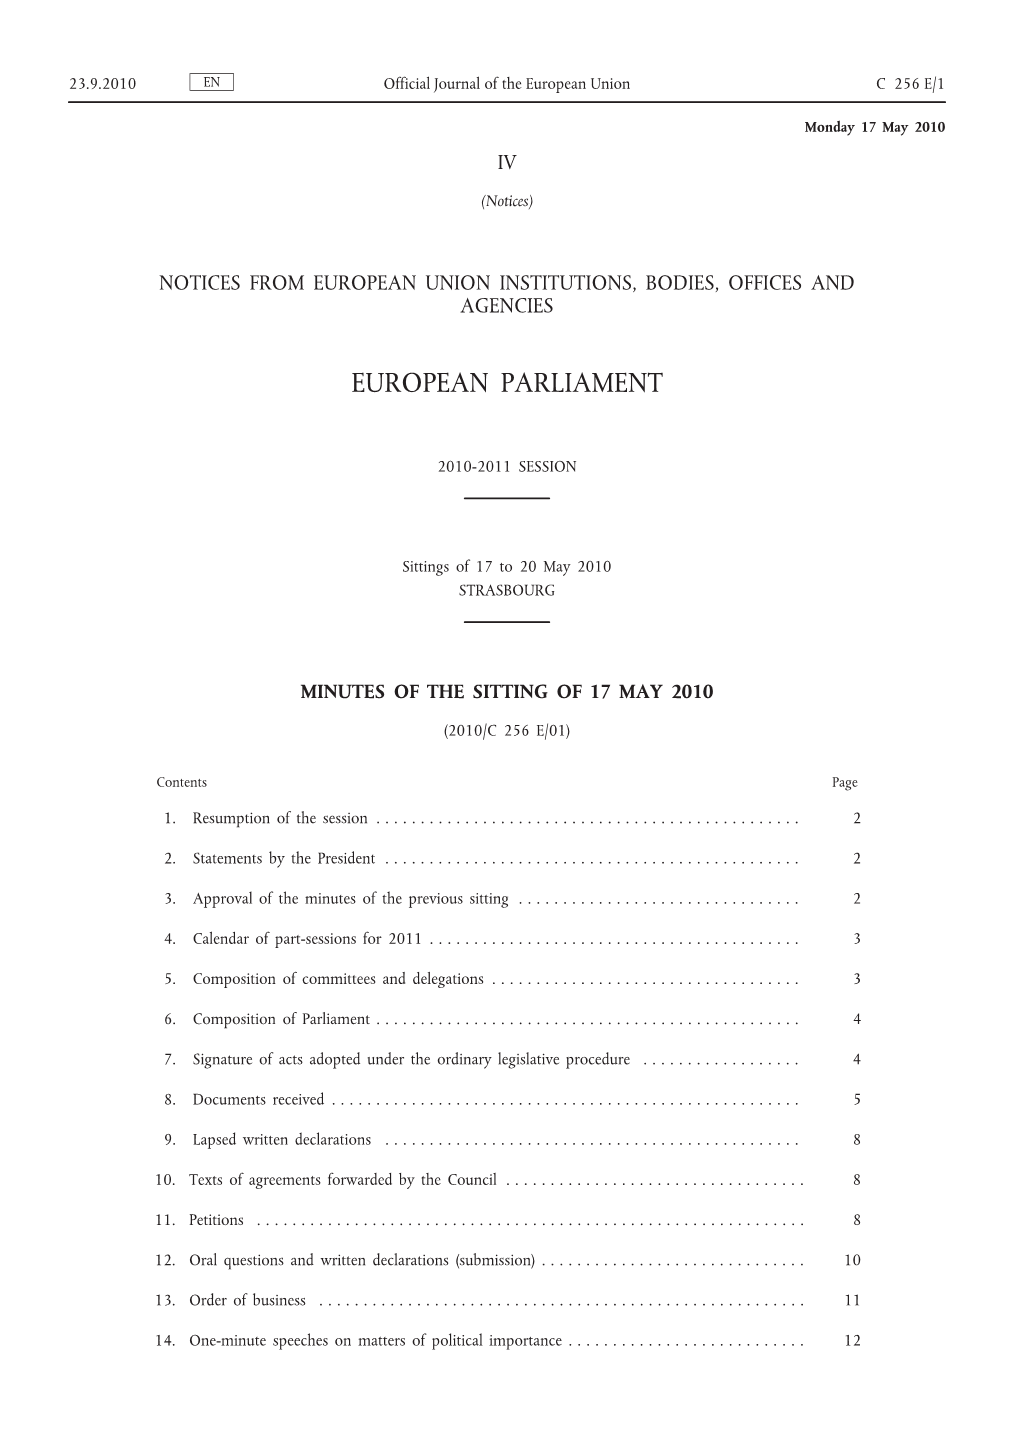 Minutes of the Sitting of 17 May 2010